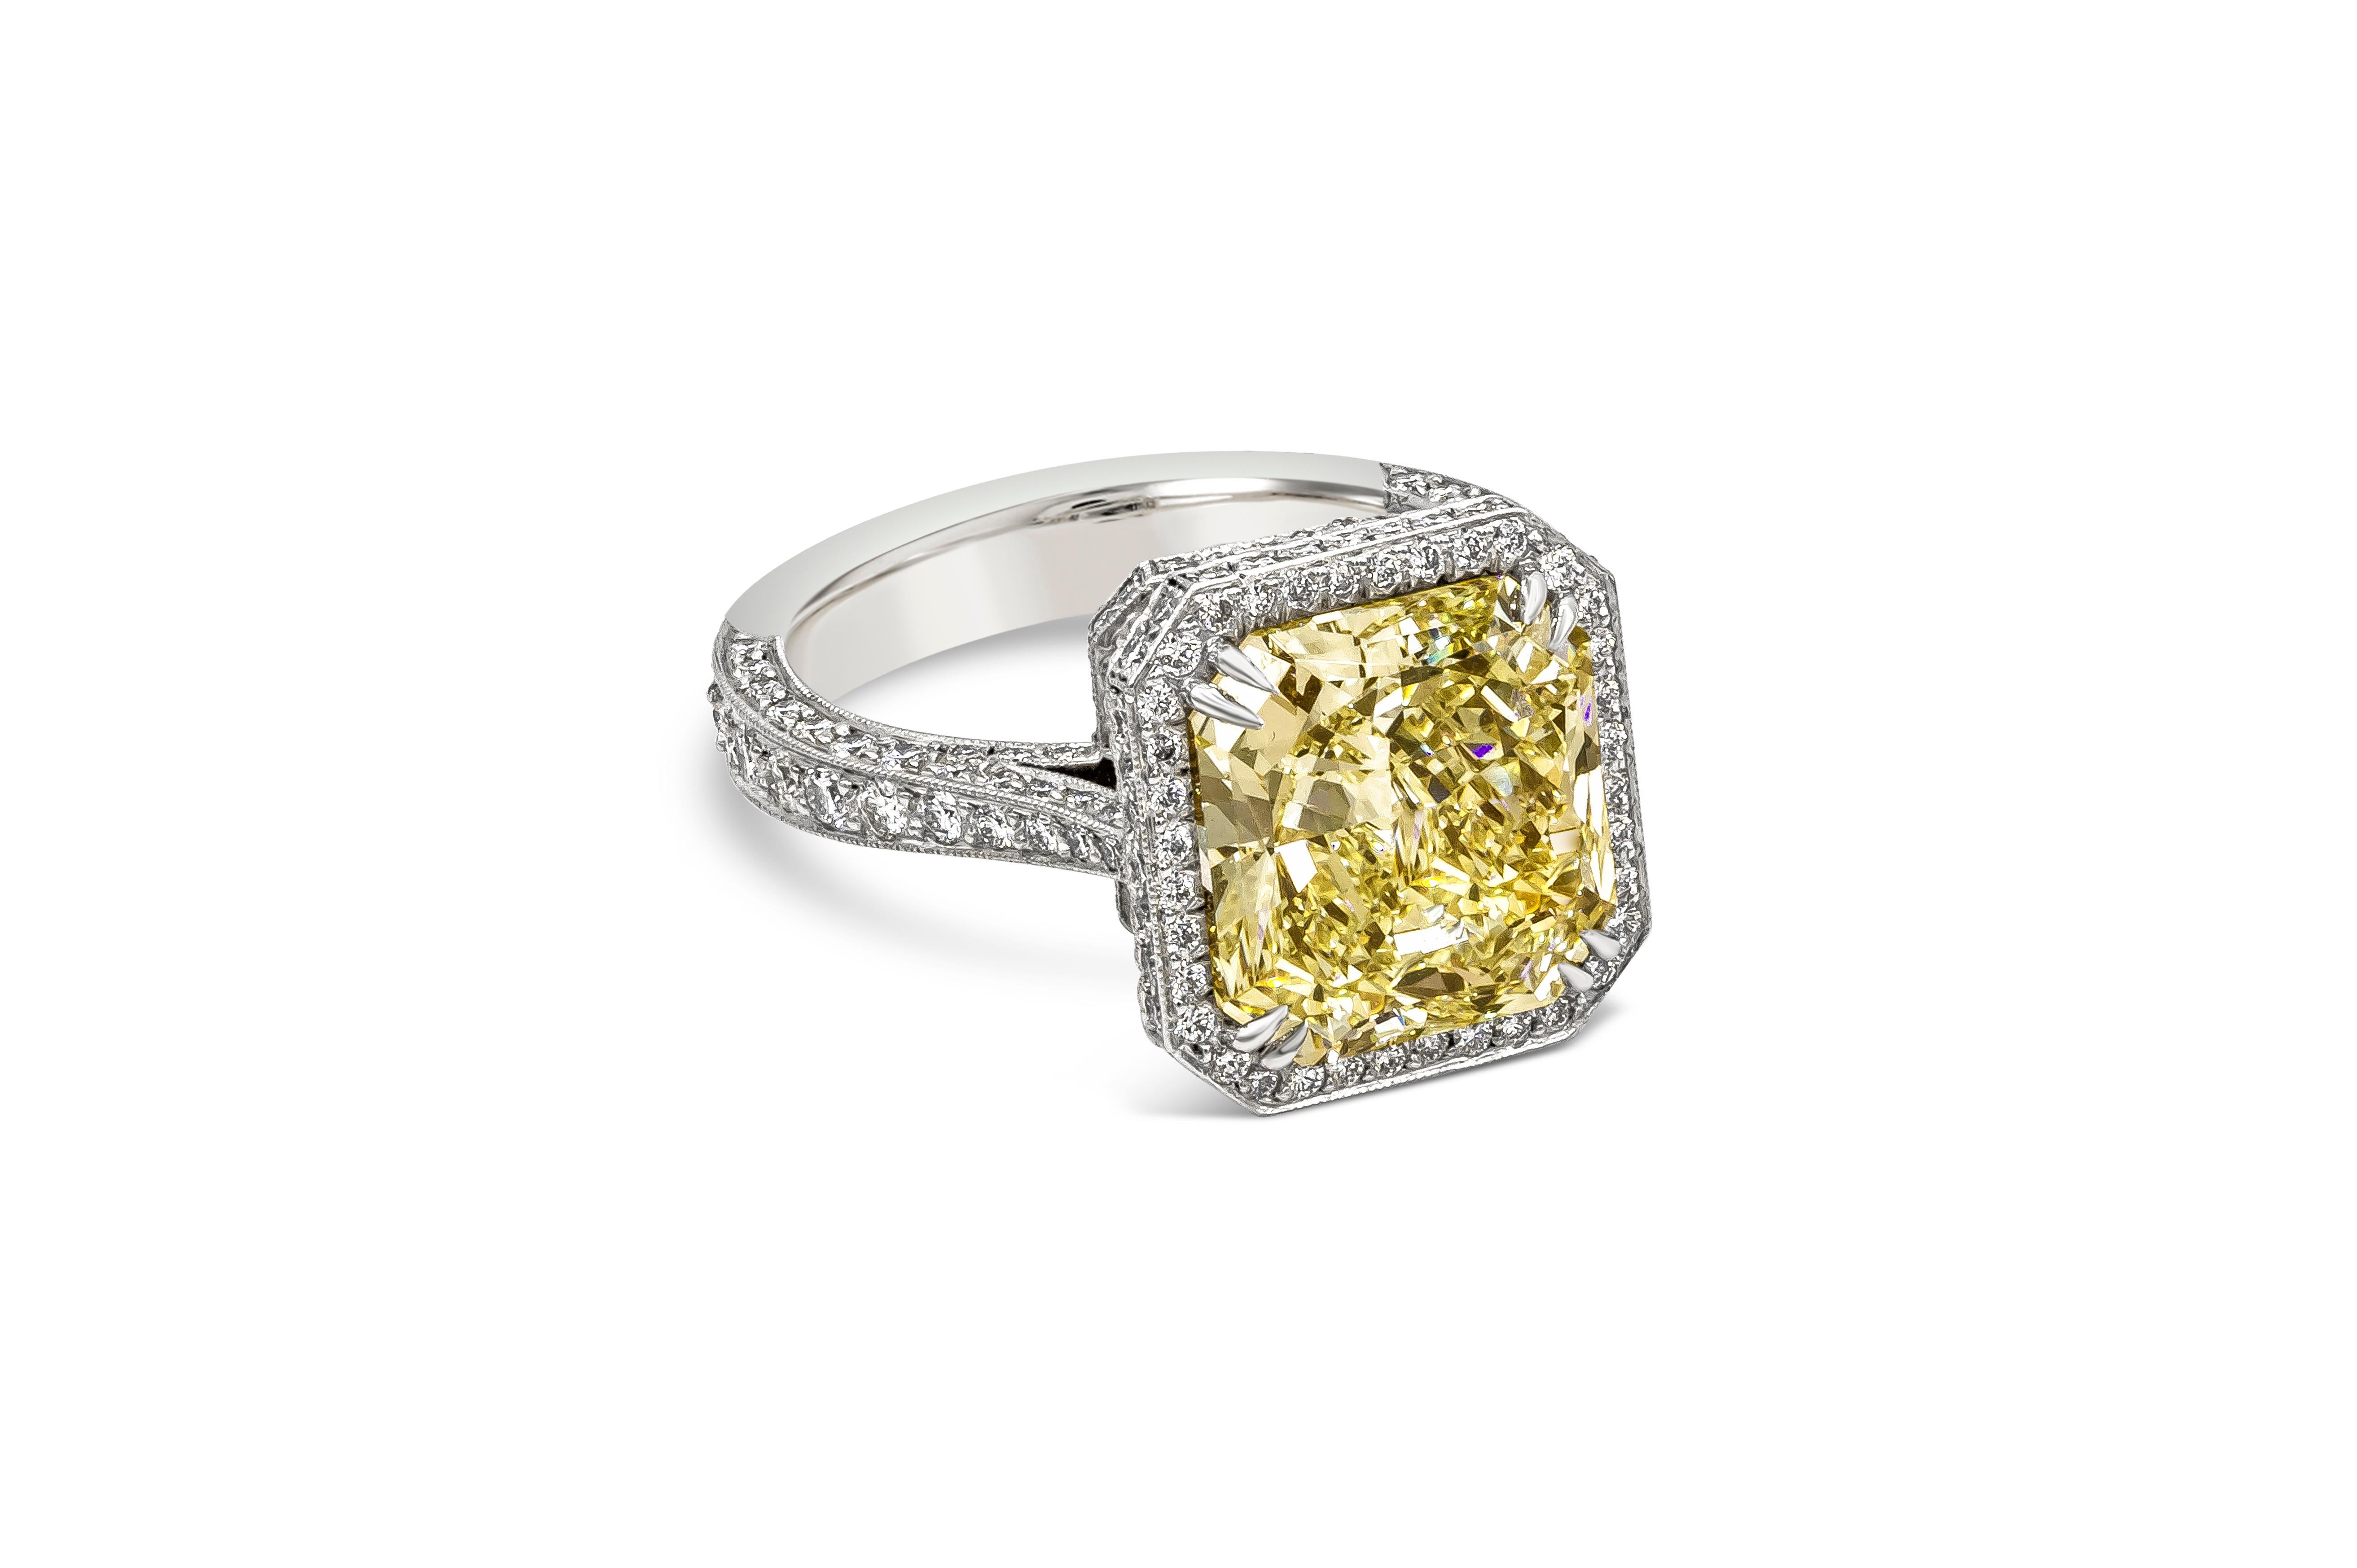 A vintage style engagement ring showcasing a 5.27 carat radiant cut yellow diamond certified by GIA as Fancy Light Yellow color and VS1 clarity, set in an eight-prong polished platinum. The center stone is surrounded by a beautiful diamond halo and